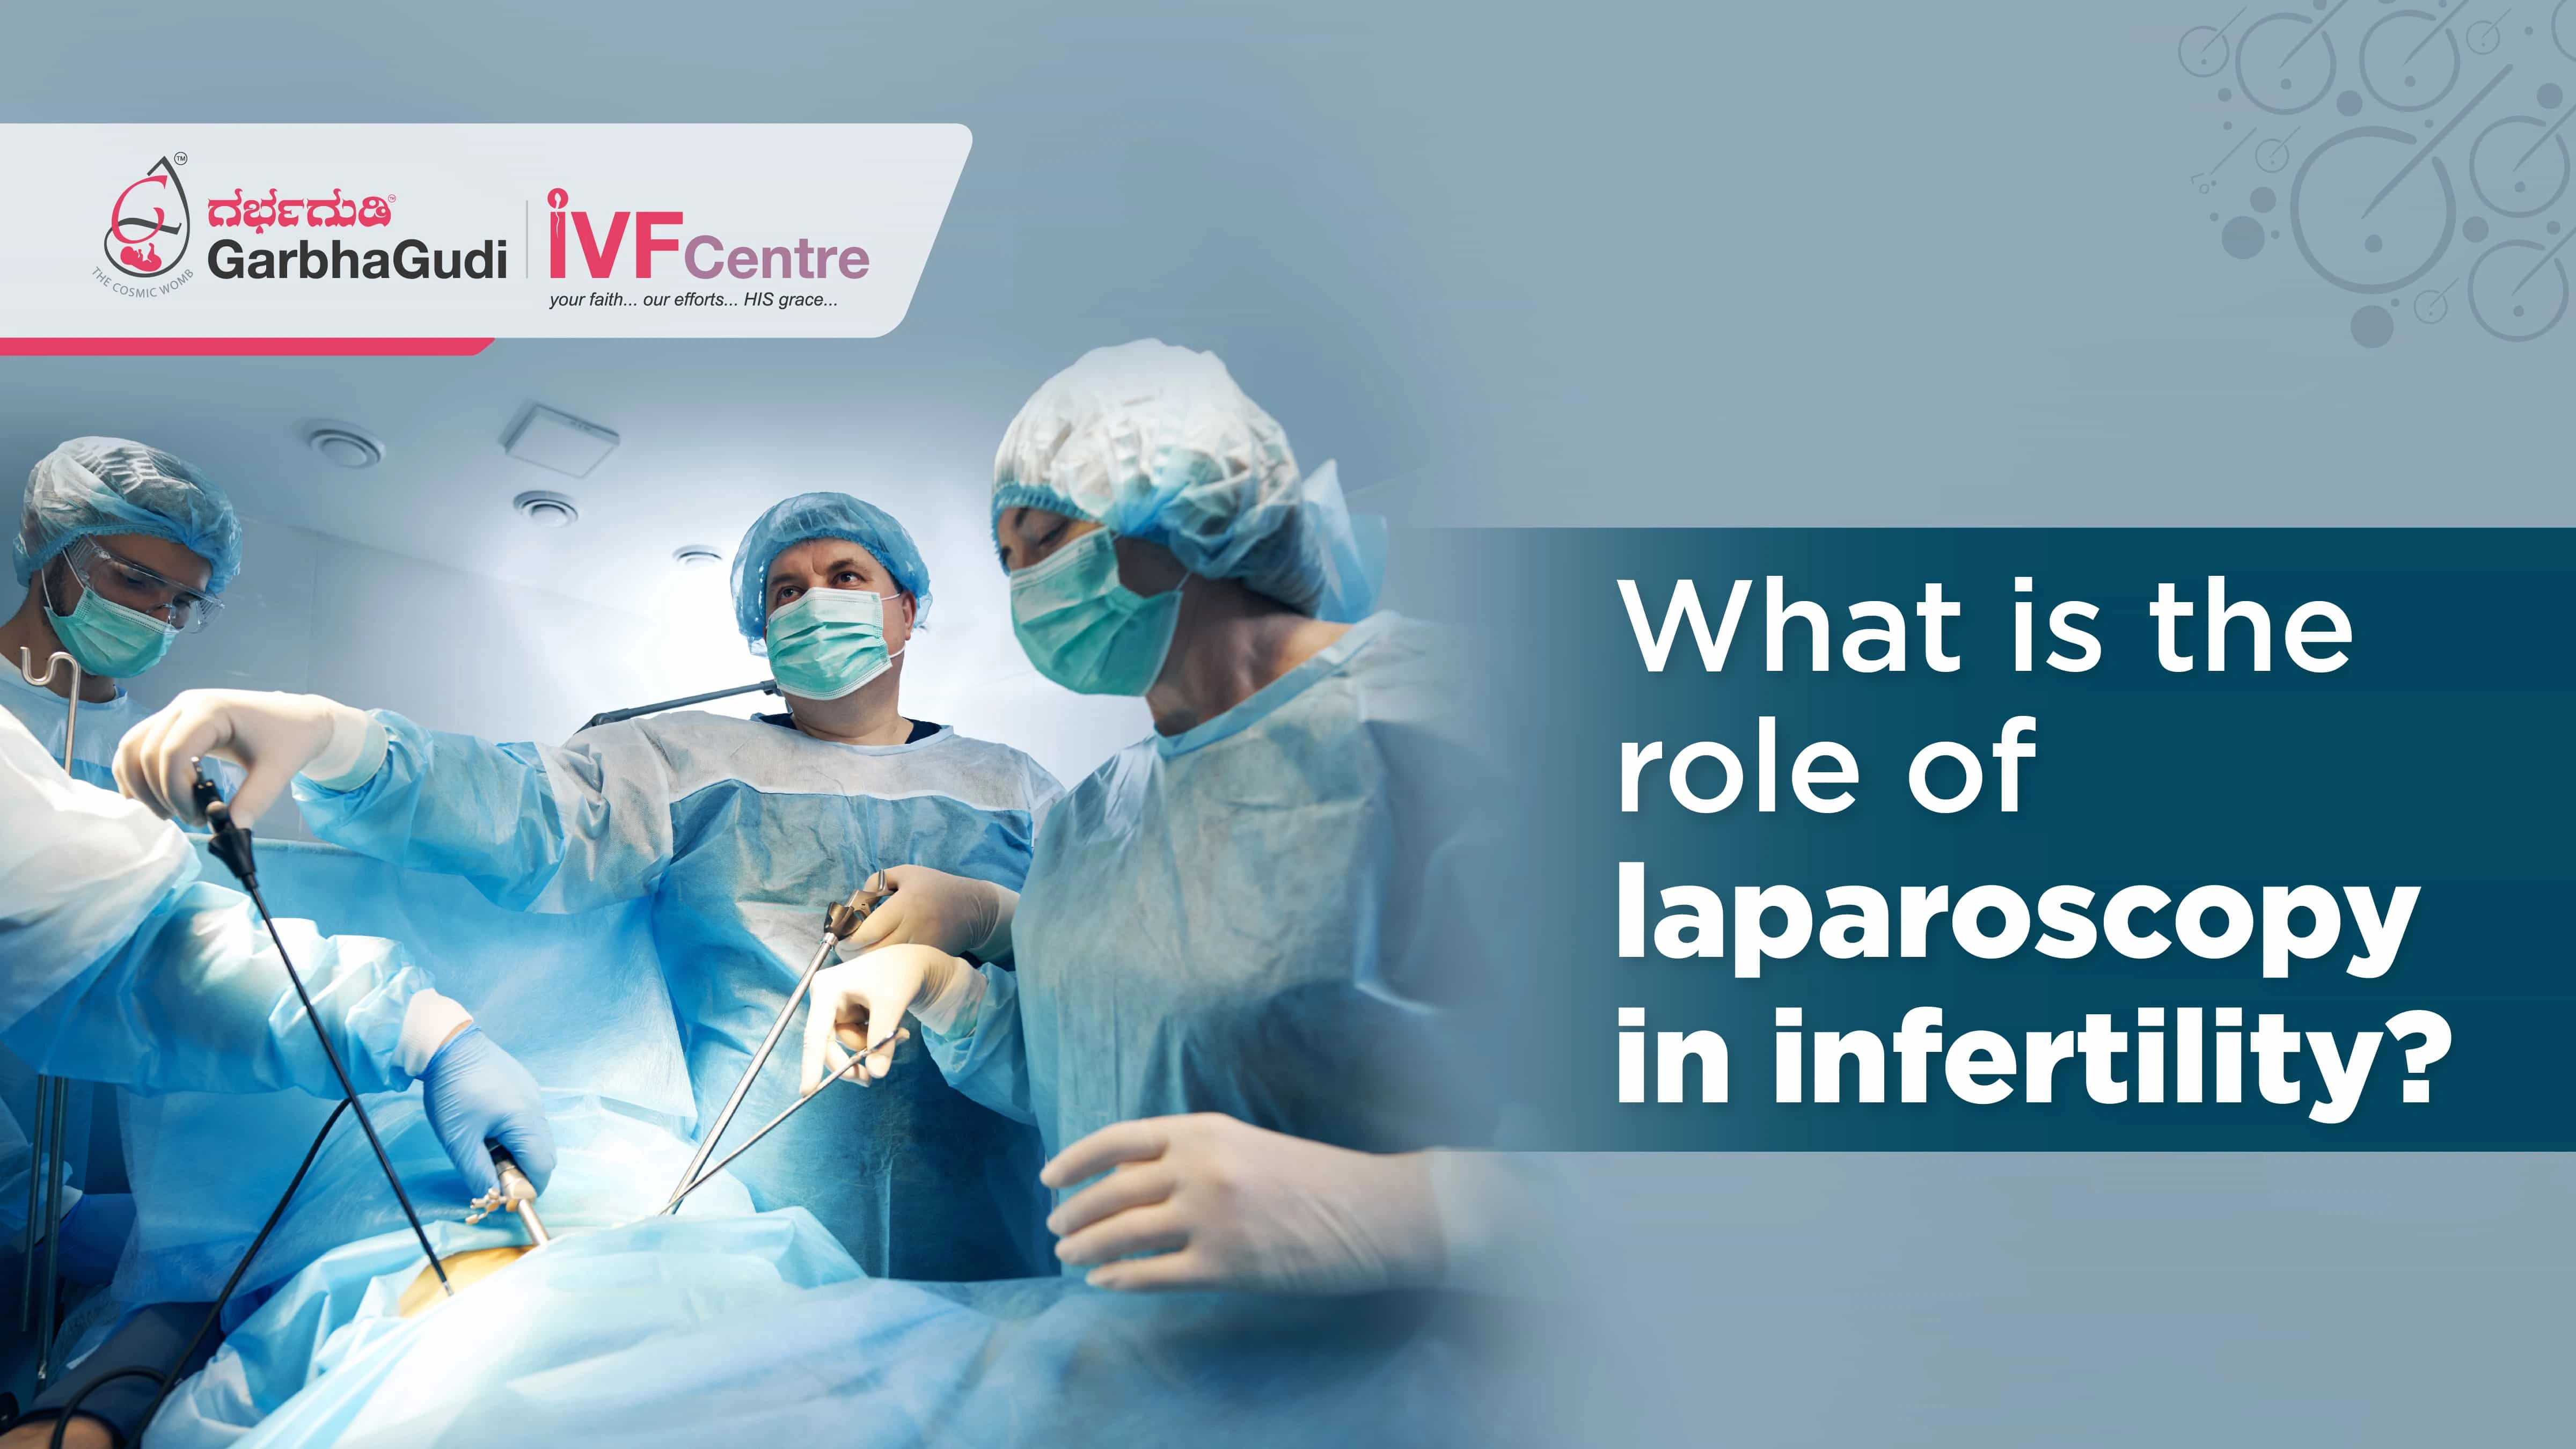 What is the role of laparoscopy in infertility?